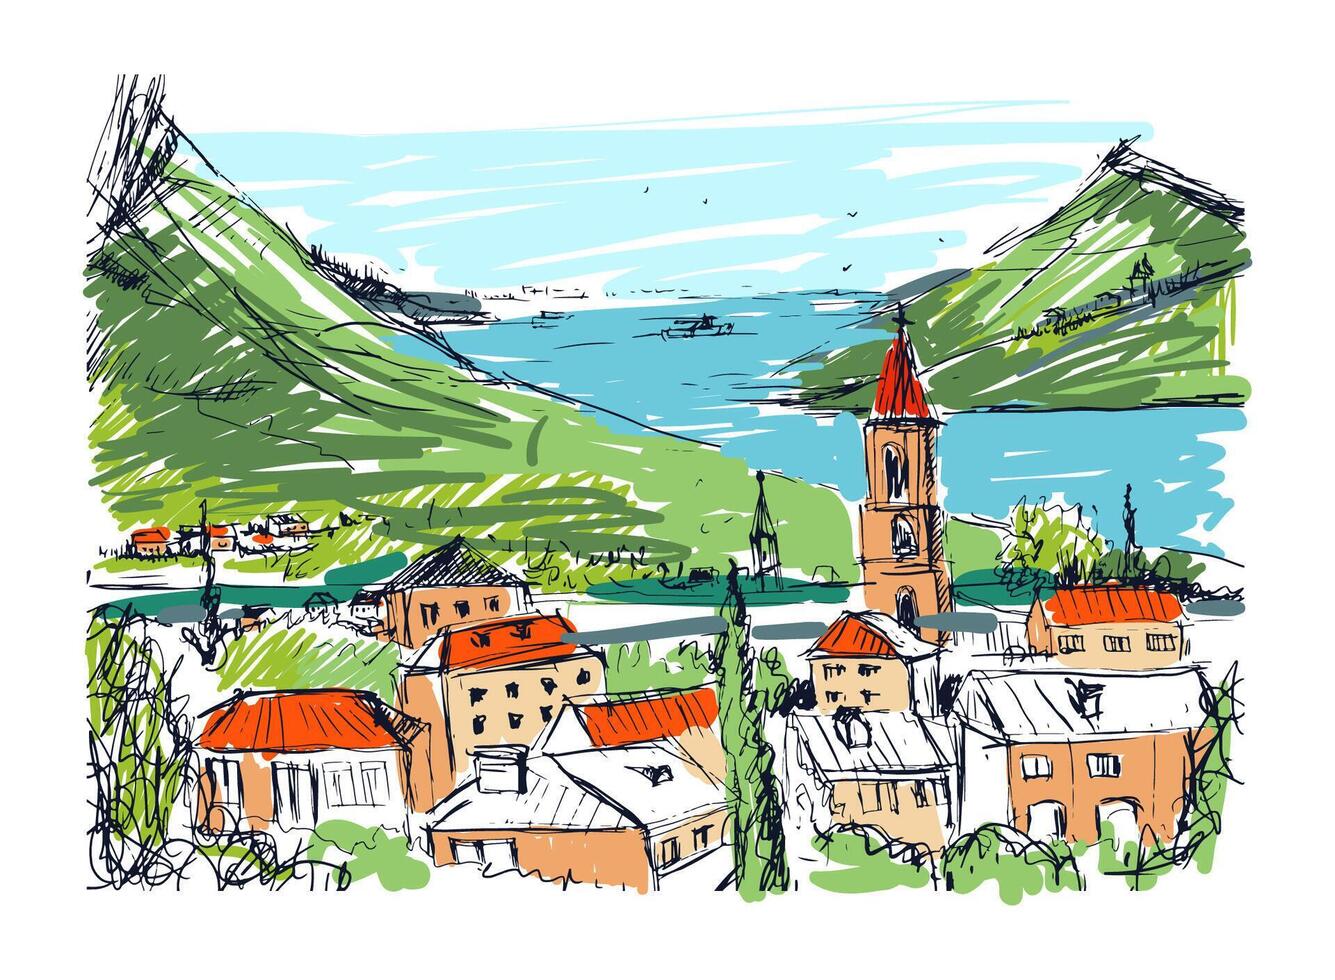 Colored hand drawn landscape with old Georgian town, mountains and harbor. Beautiful colorful freehand sketch with buildings and streets of small city located near sea and hills. Vector illustration.